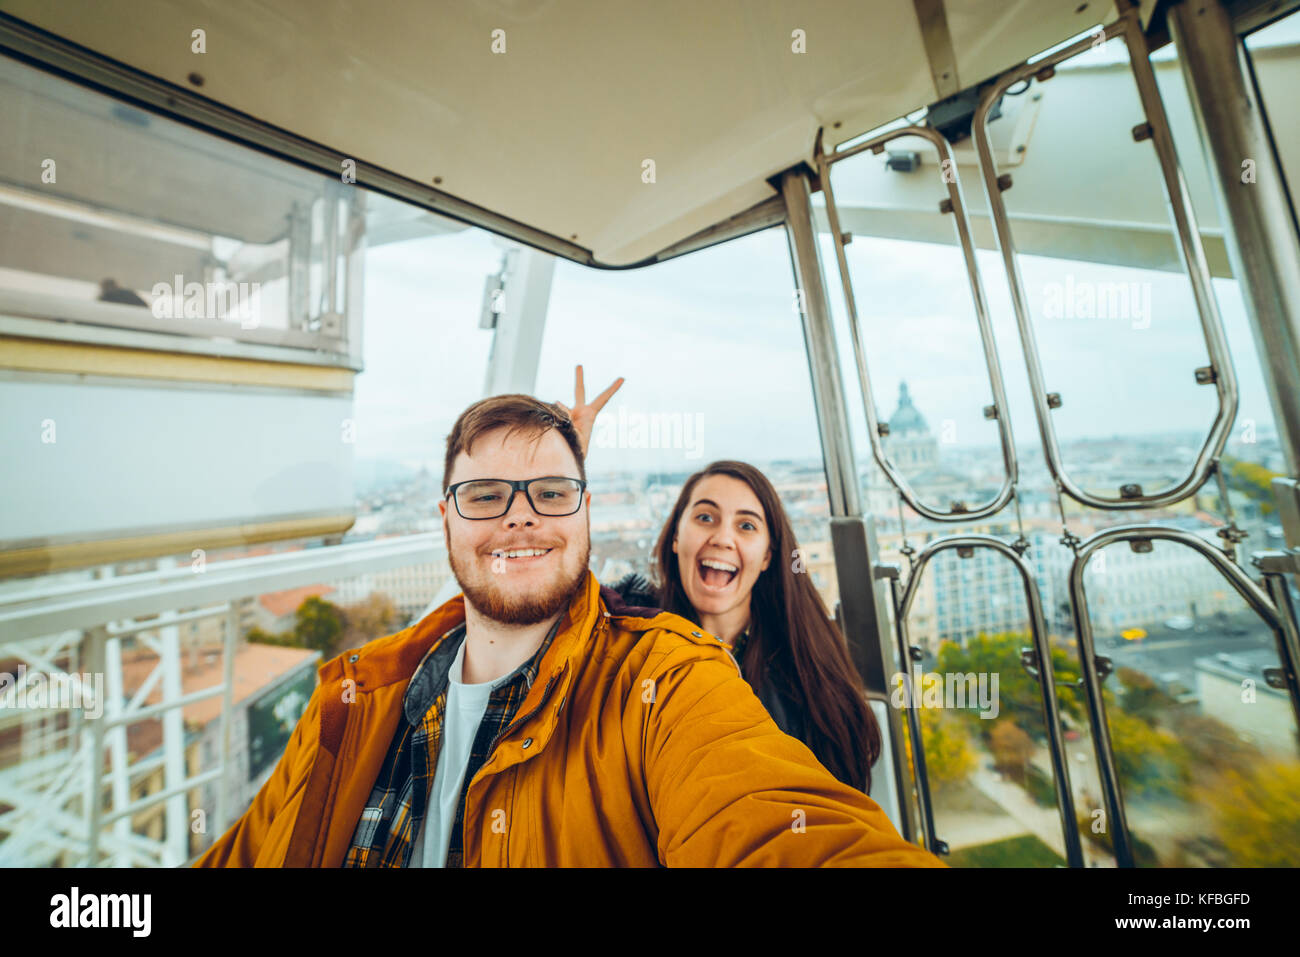 man with woman at ferris wheel taking a selfie Stock Photo